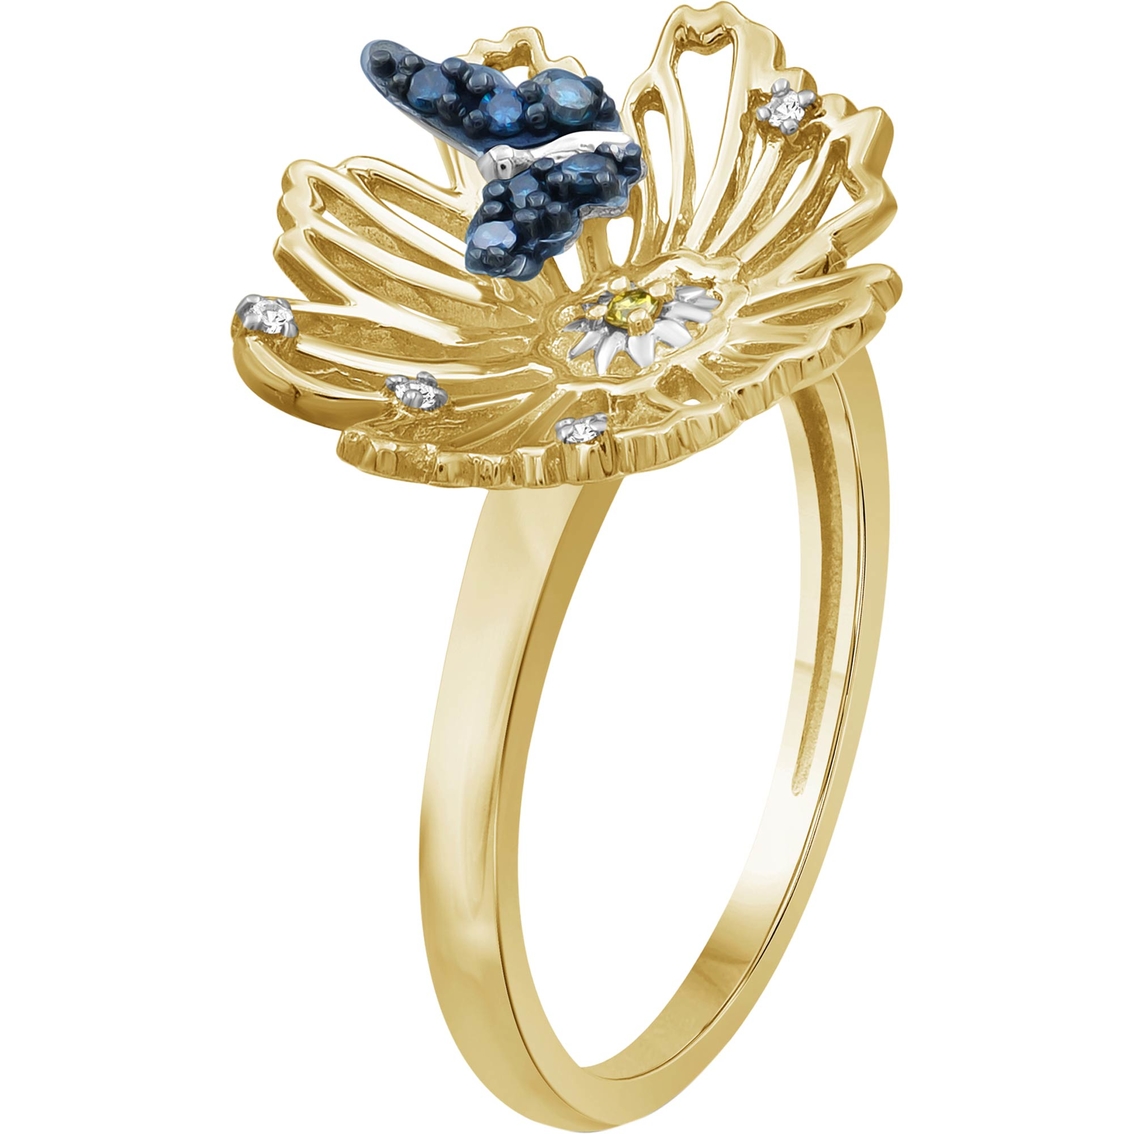 Animal's Rock 14K Yellow Gold Over Sterling Silver 1/10 CTW Diamond Butterfly Ring - Image 2 of 2